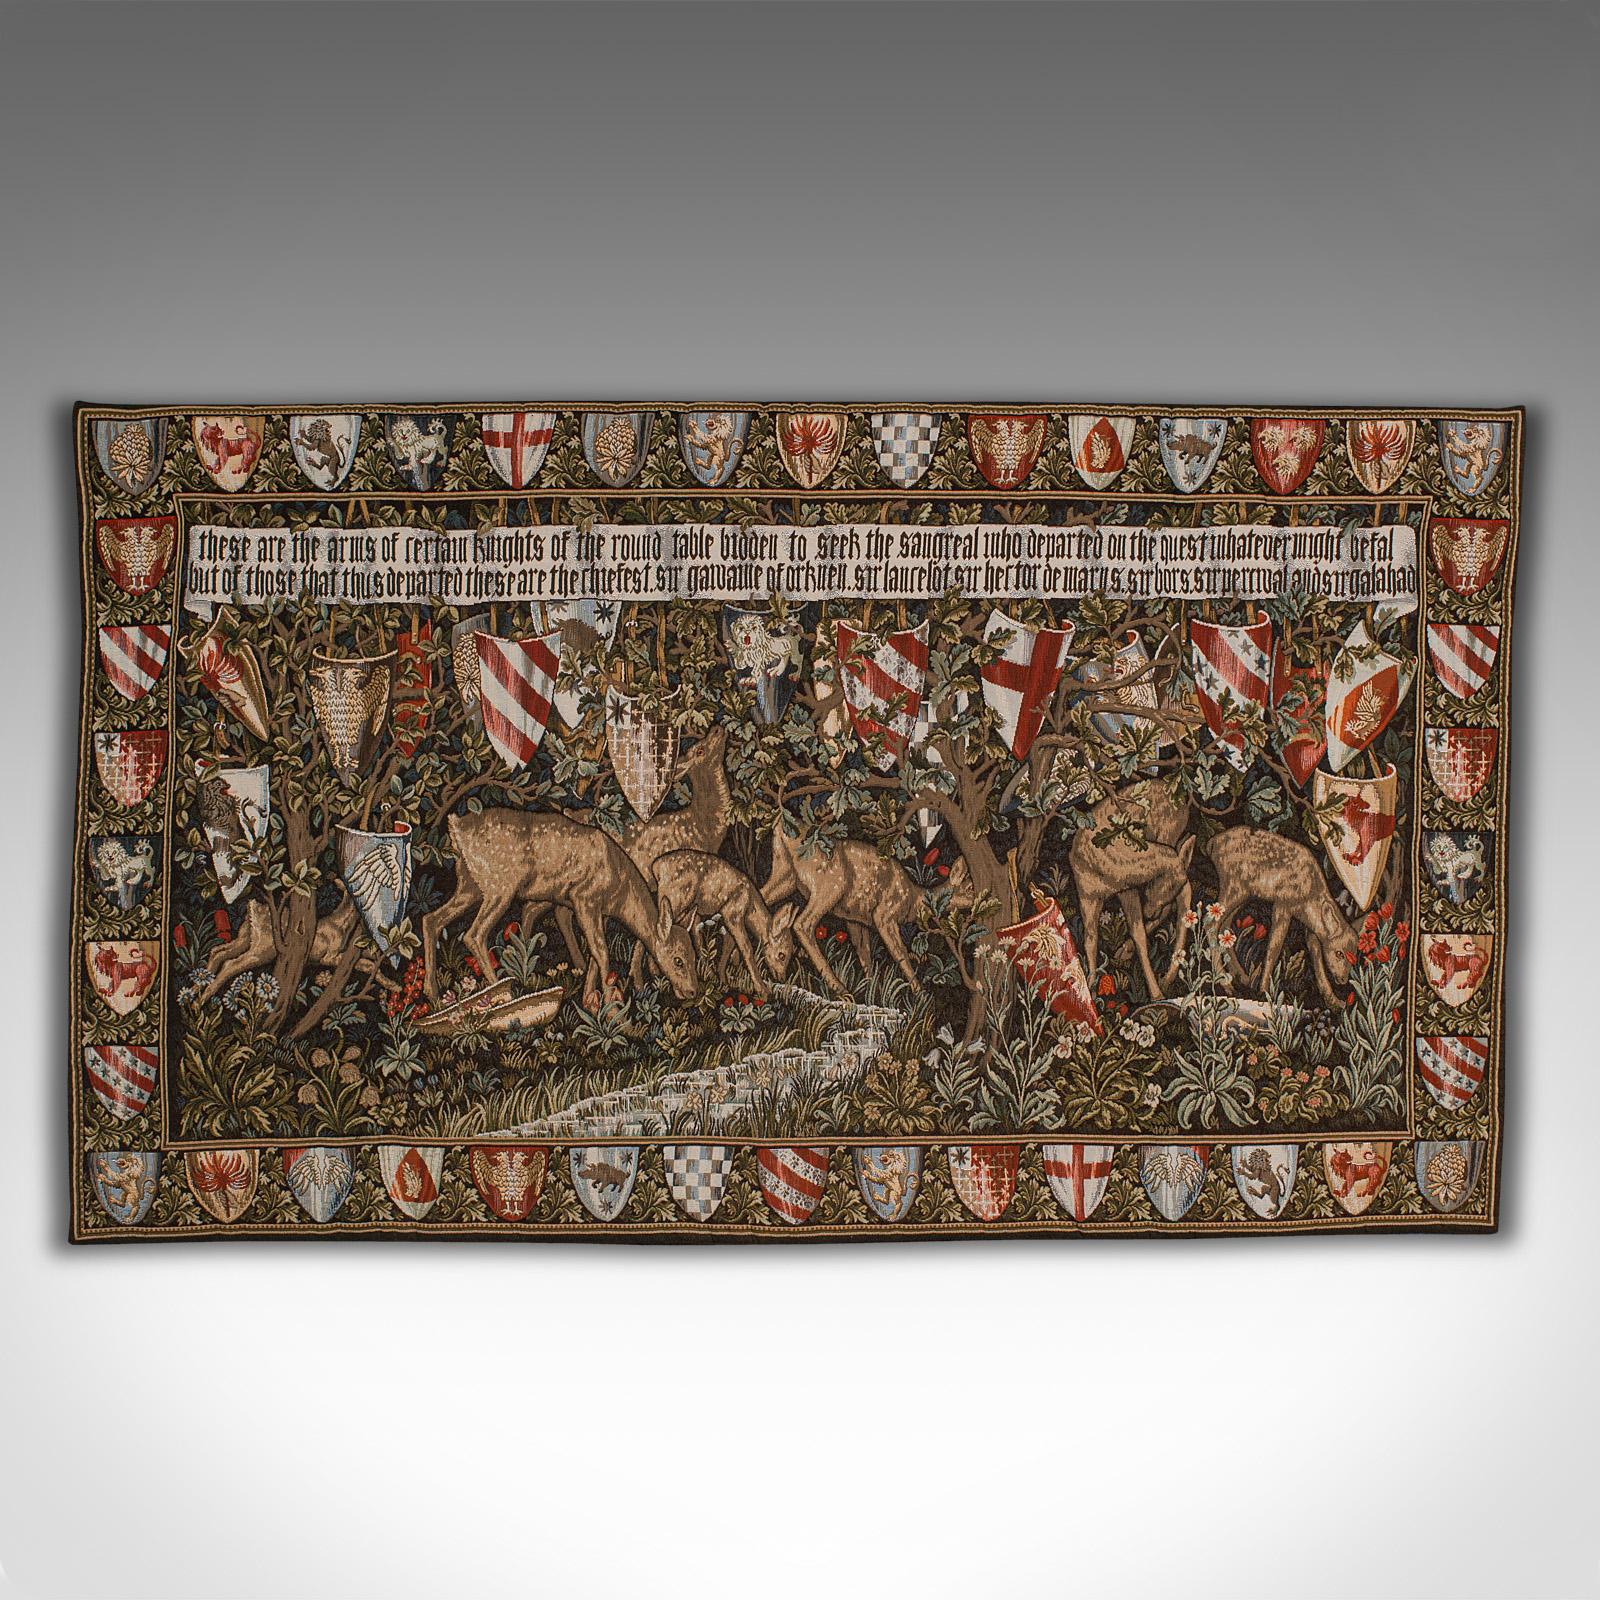 This is a quality vintage verdure panel. A Belgian, jacquard woven decorative wall scene, dating to the late 20th century, circa 1980.

Fascinating example of the William Morris tapestry of 1900, housed in the Birmingham Museum
Displays a